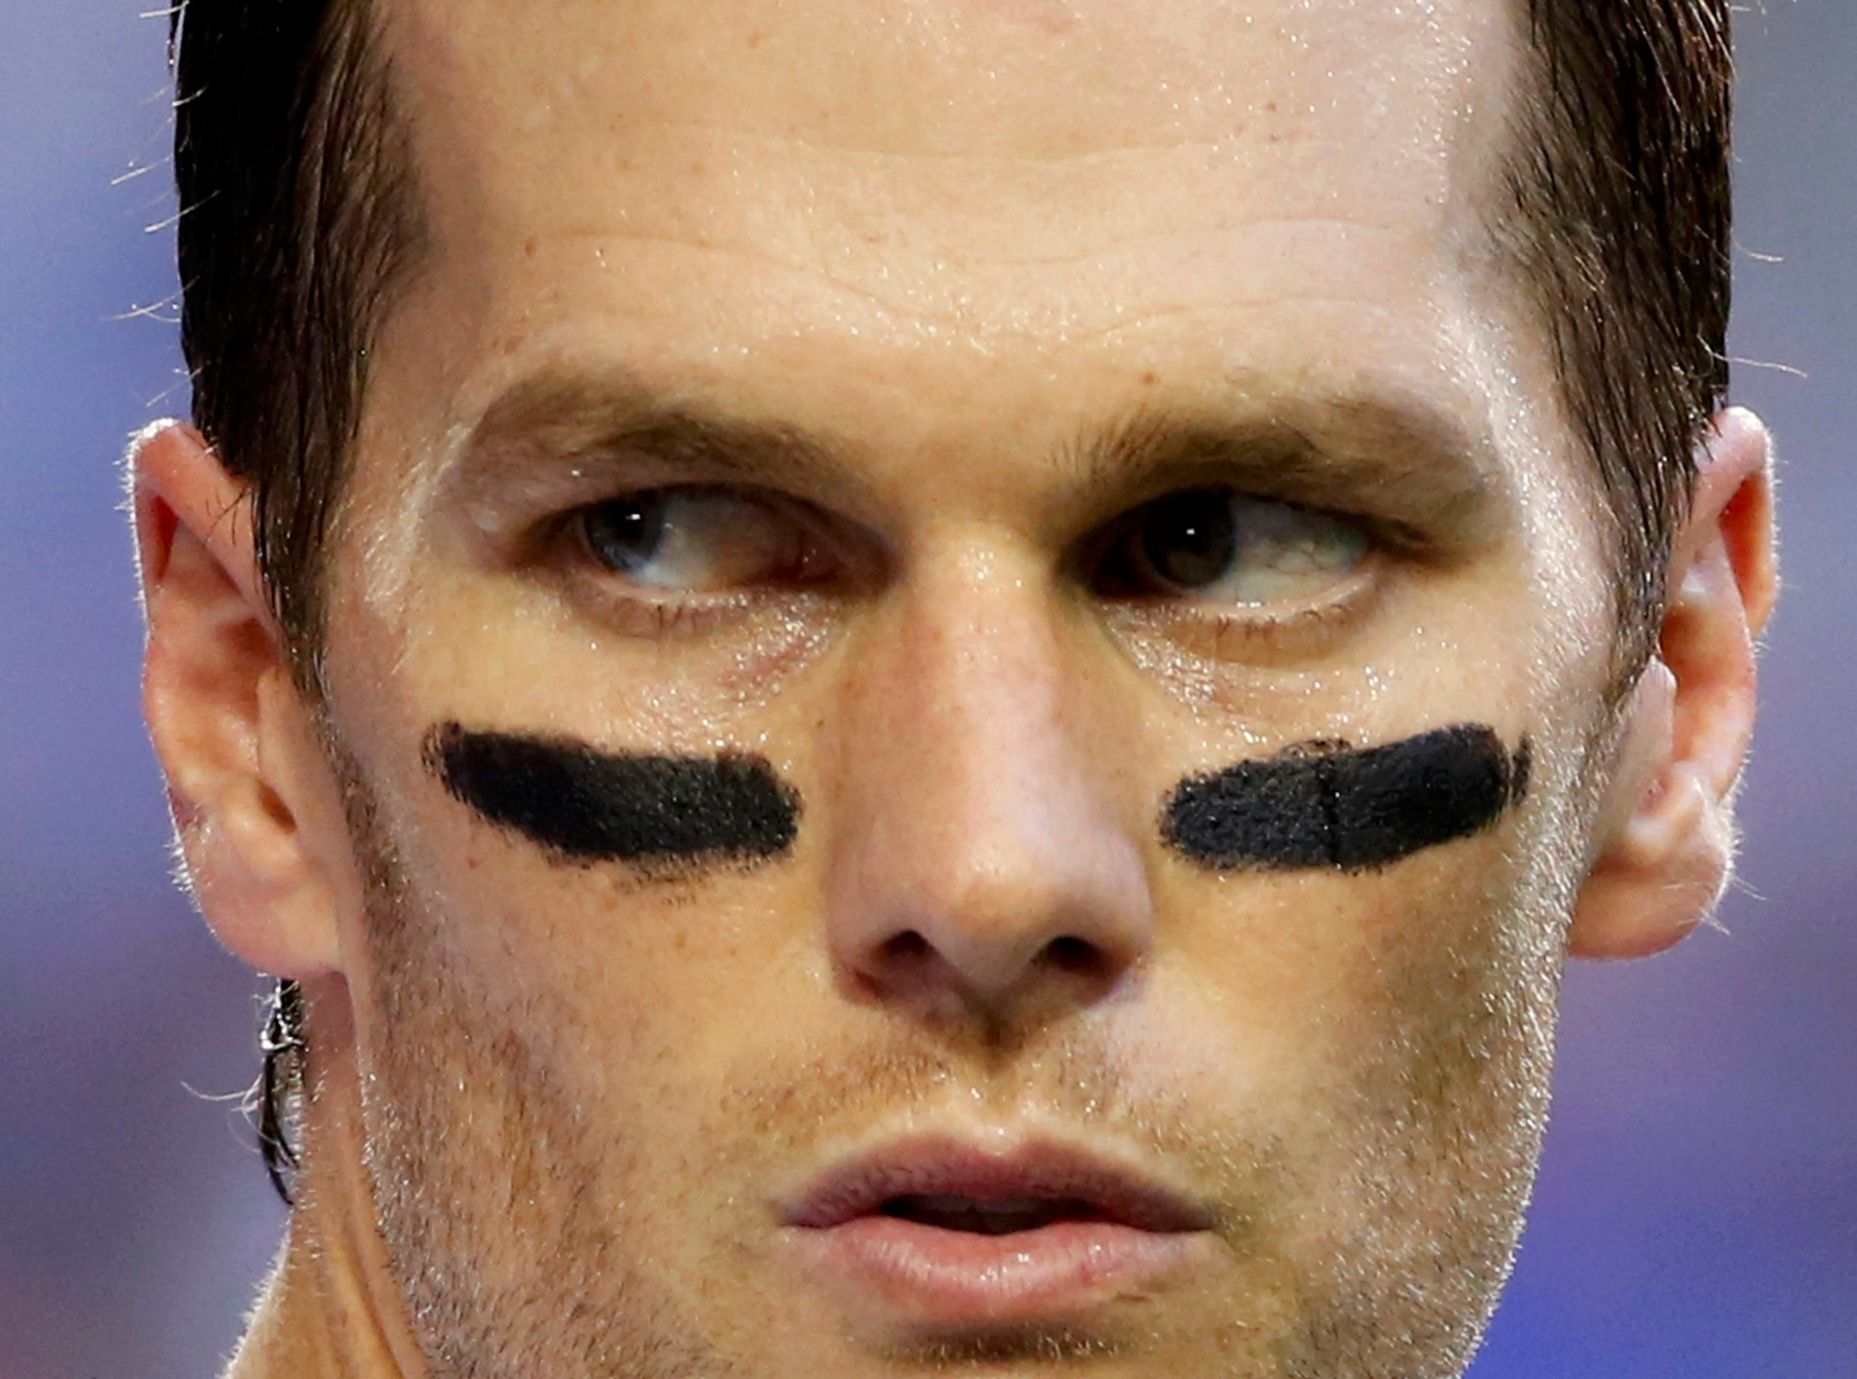 New England Patriots quarterback Tom Brady takes his helmet off during warm-ups ahead of the start of the NFL Super Bowl XLIX football game against the Seattle Seahawks in Glendale